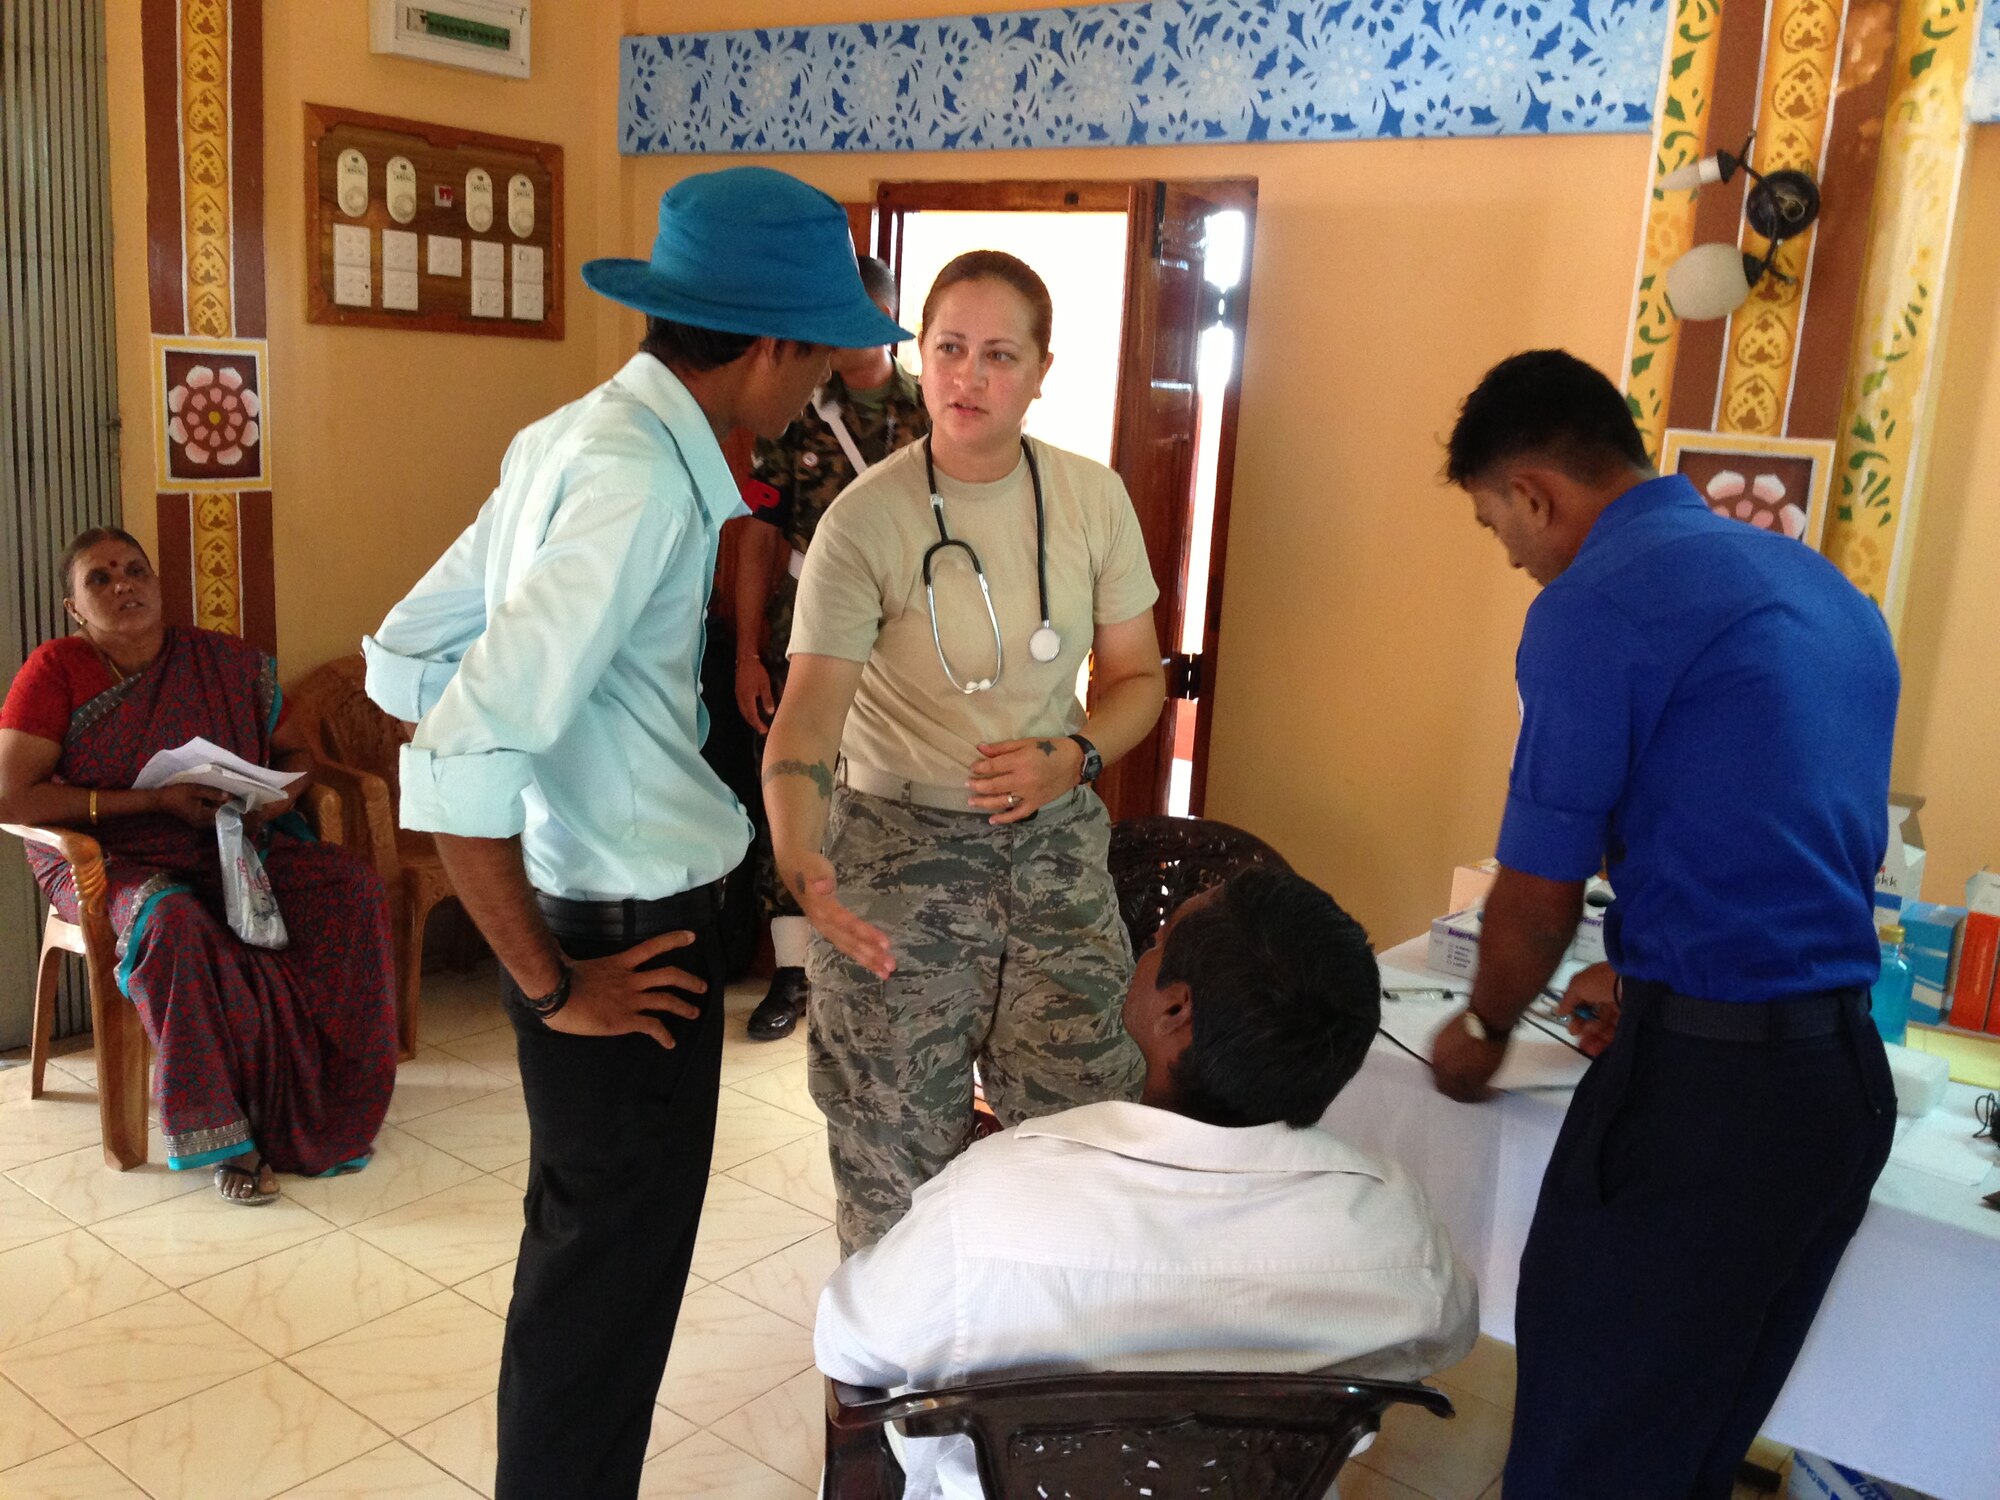 Air Force Tech. Sgt. Danielle Fahlbush, an Aerospace Medical Technician helps patients during the Pacific Angel Mission in the Jaffna Peninsula of Sri Lanka, July 28- Aug.18. (Photo courtesy of Tech. Sgt. Misty Ray, 142nd Fighter Wing Medical Group).